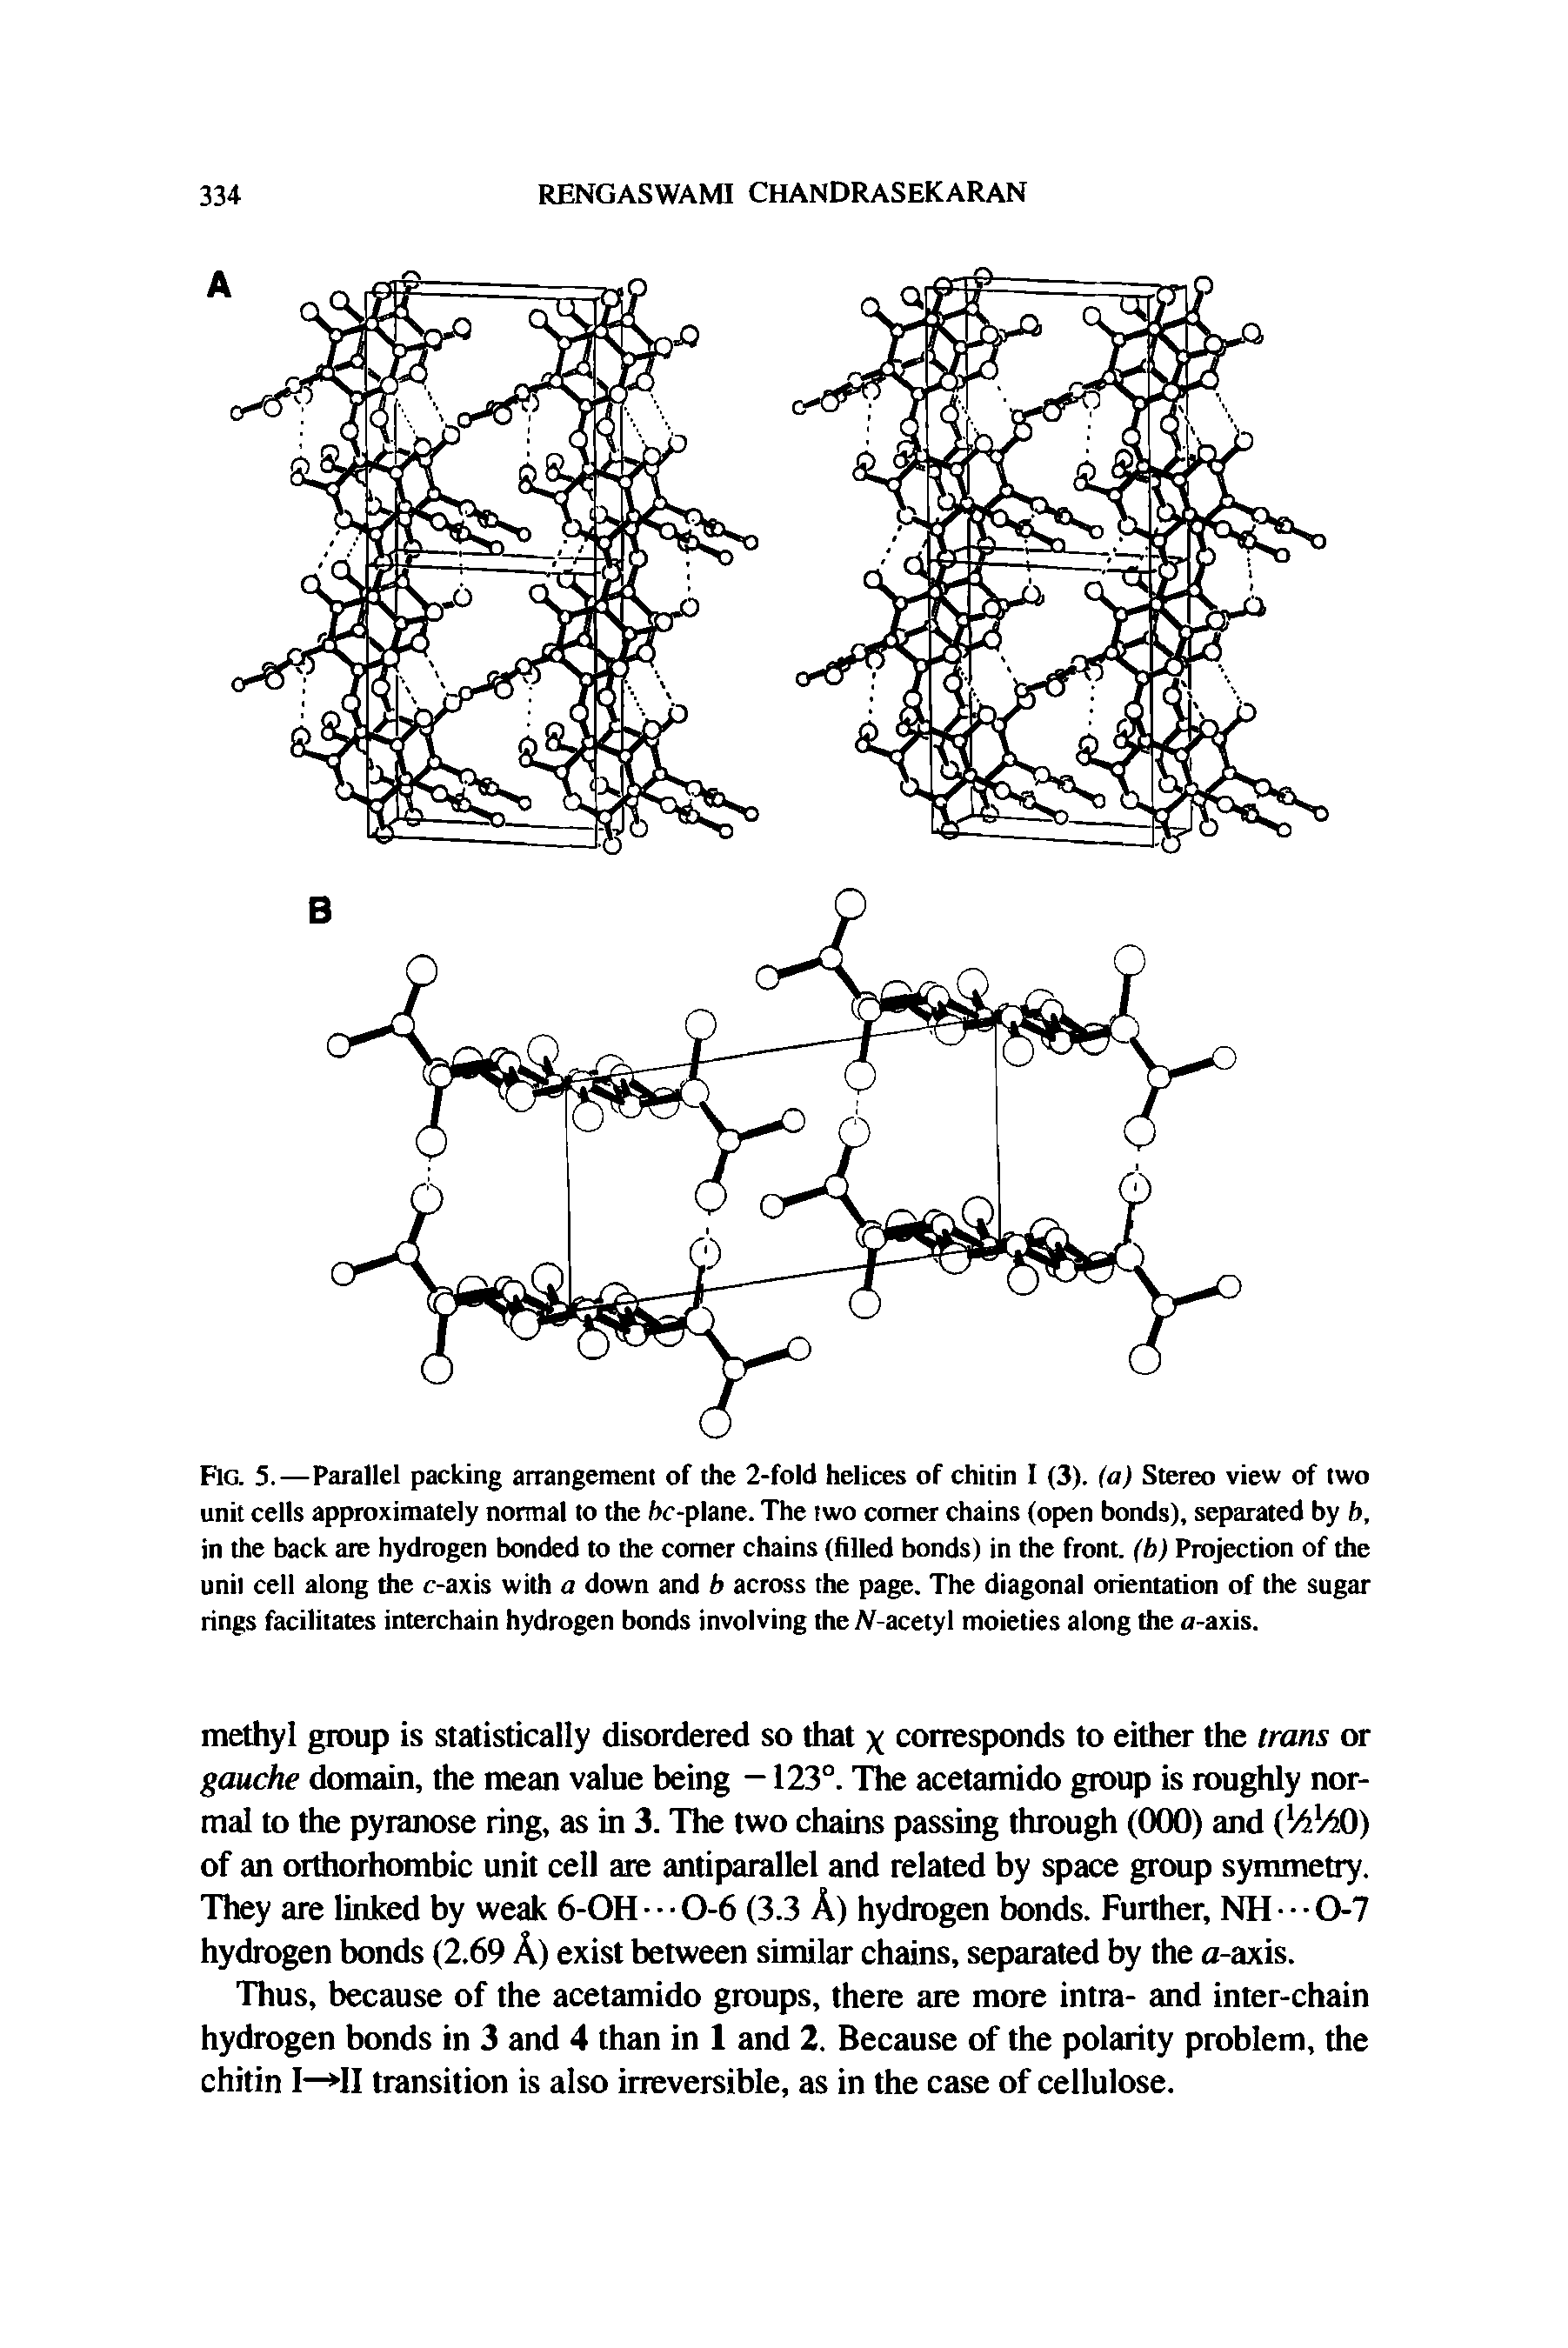 Fig. 5.—Parallel packing arrangement of the 2-fold helices of chitin I (3). (a) Stereo view of two unit cells approximately normal to the hc-plane. The two comer chains (open bonds), separated by b, in the back are hydrogen bonded to the comer chains (tilled bonds) in the front, (b) Projection of the unit cell along the c-axis with a down and b across the page. The diagonal orientation of the sugar rings facilitates interchain hydrogen bonds involving the JV-acetyl moieties along the a-axis.